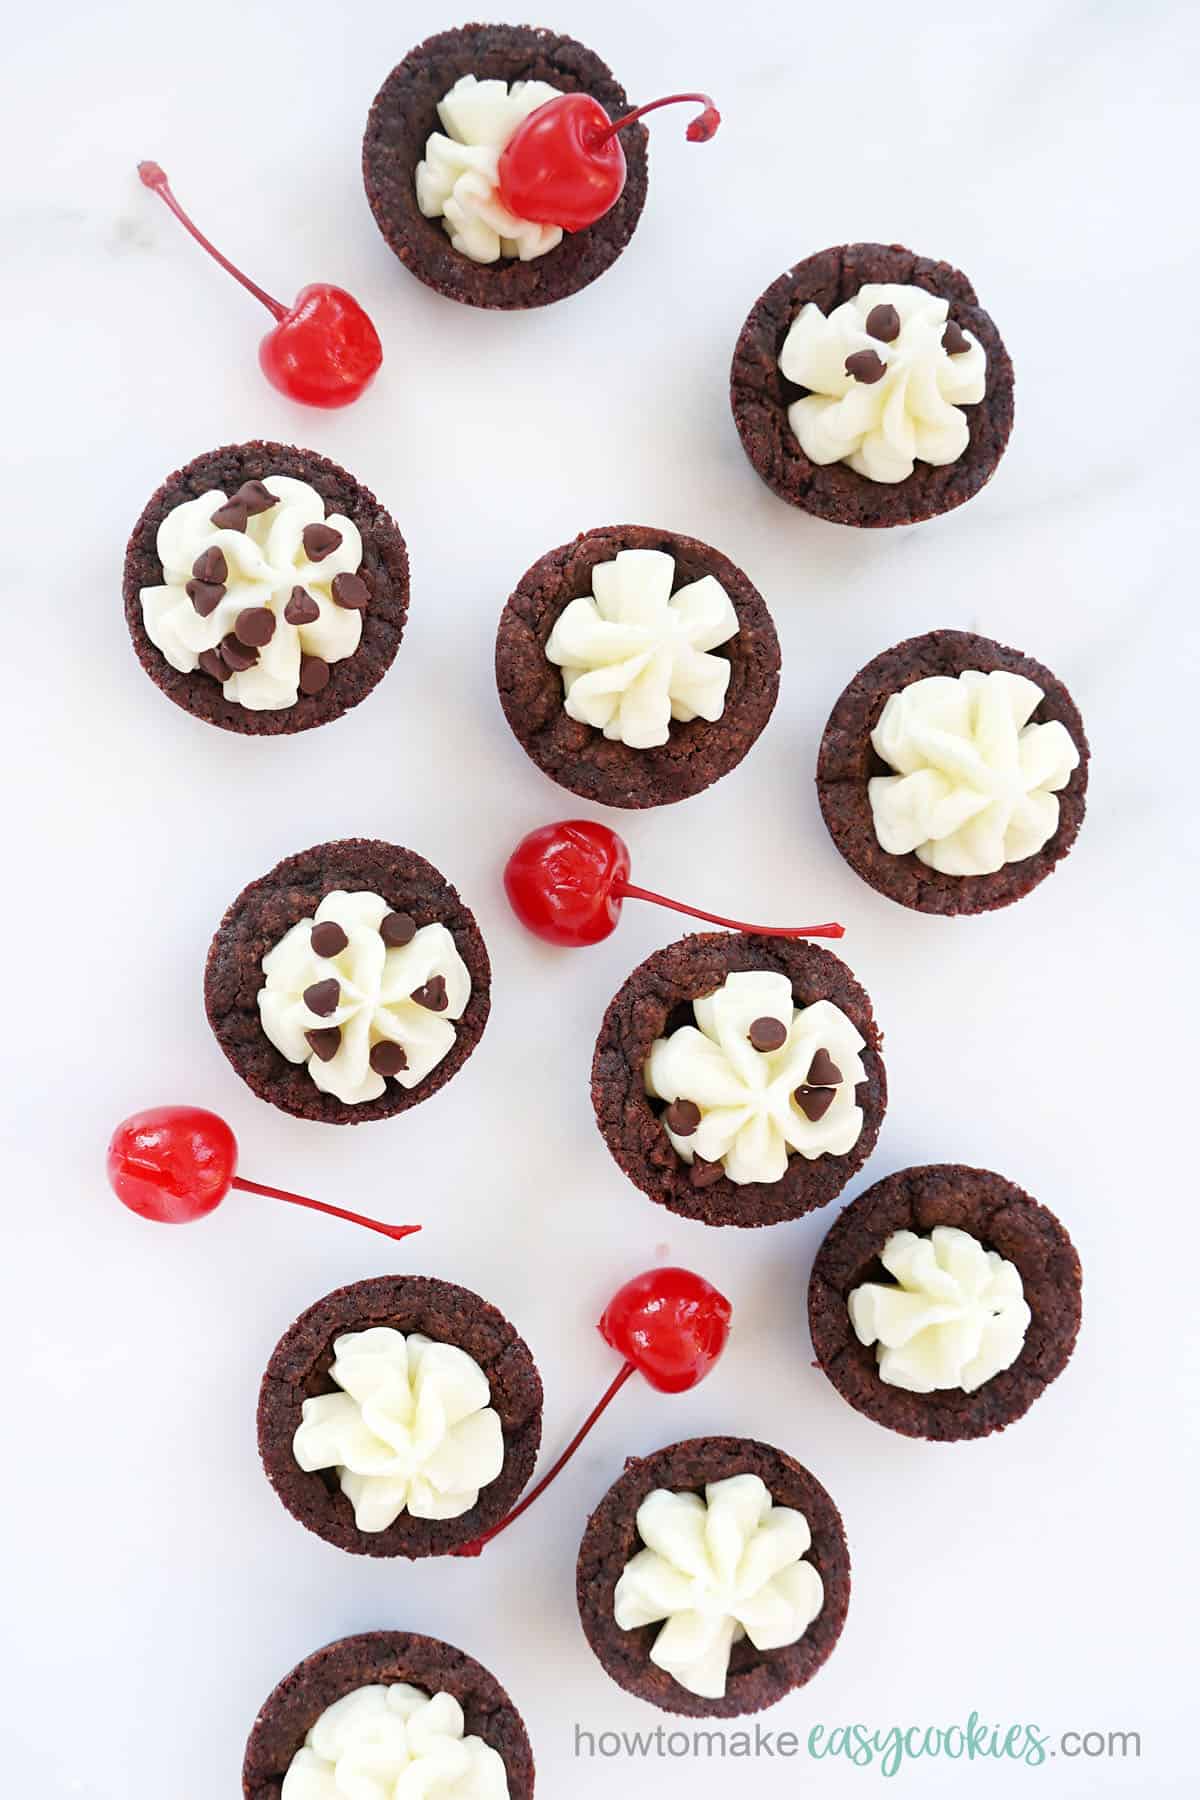 maraschino cherries and chocolate cookie cups with frosting